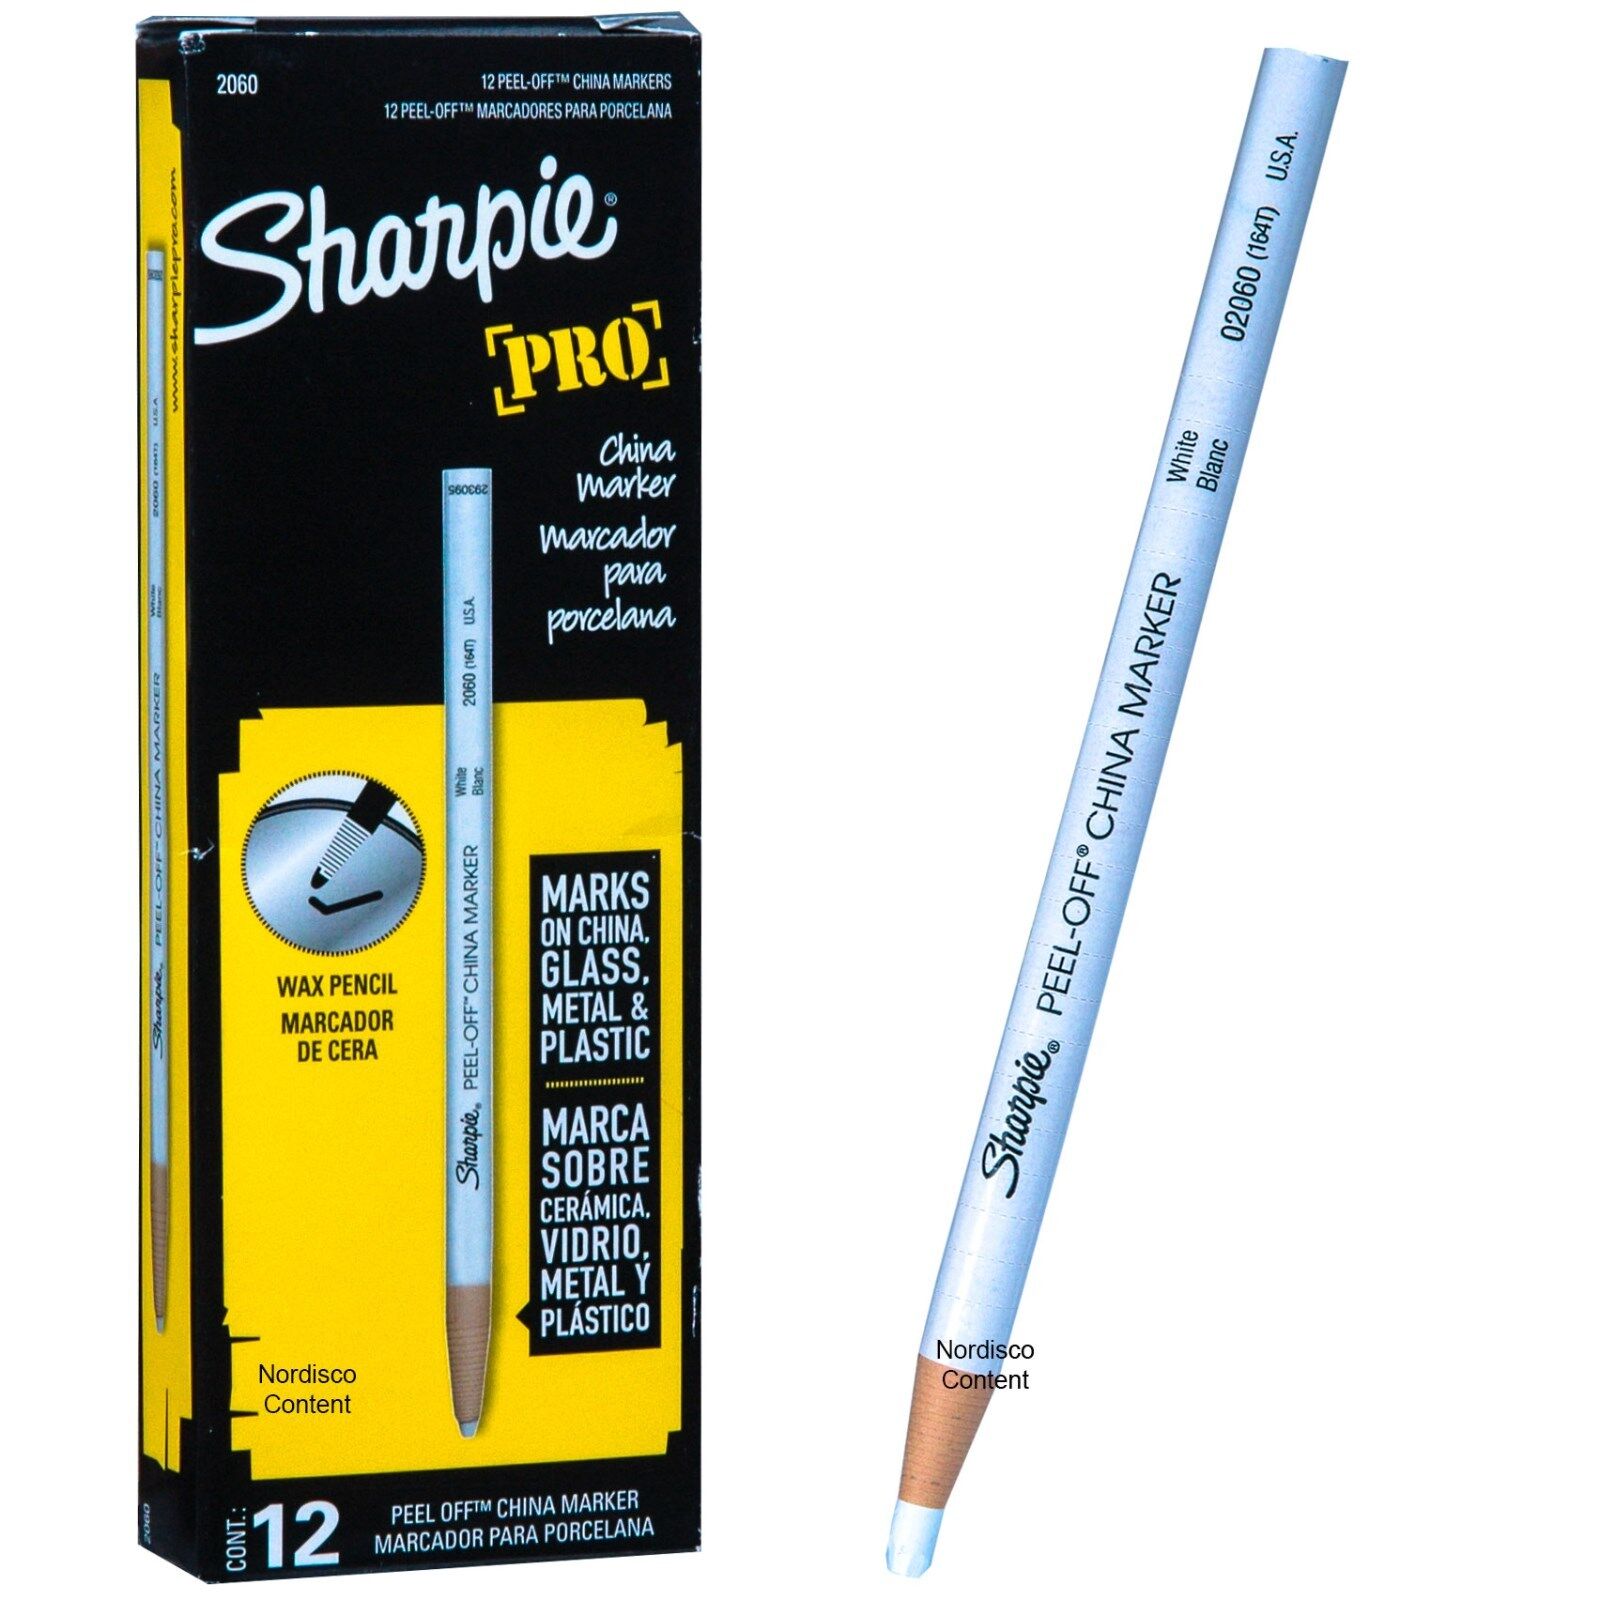 Sharpie Pro White Peel Off China Marker, Grease Pencil, 02060, Box of 12